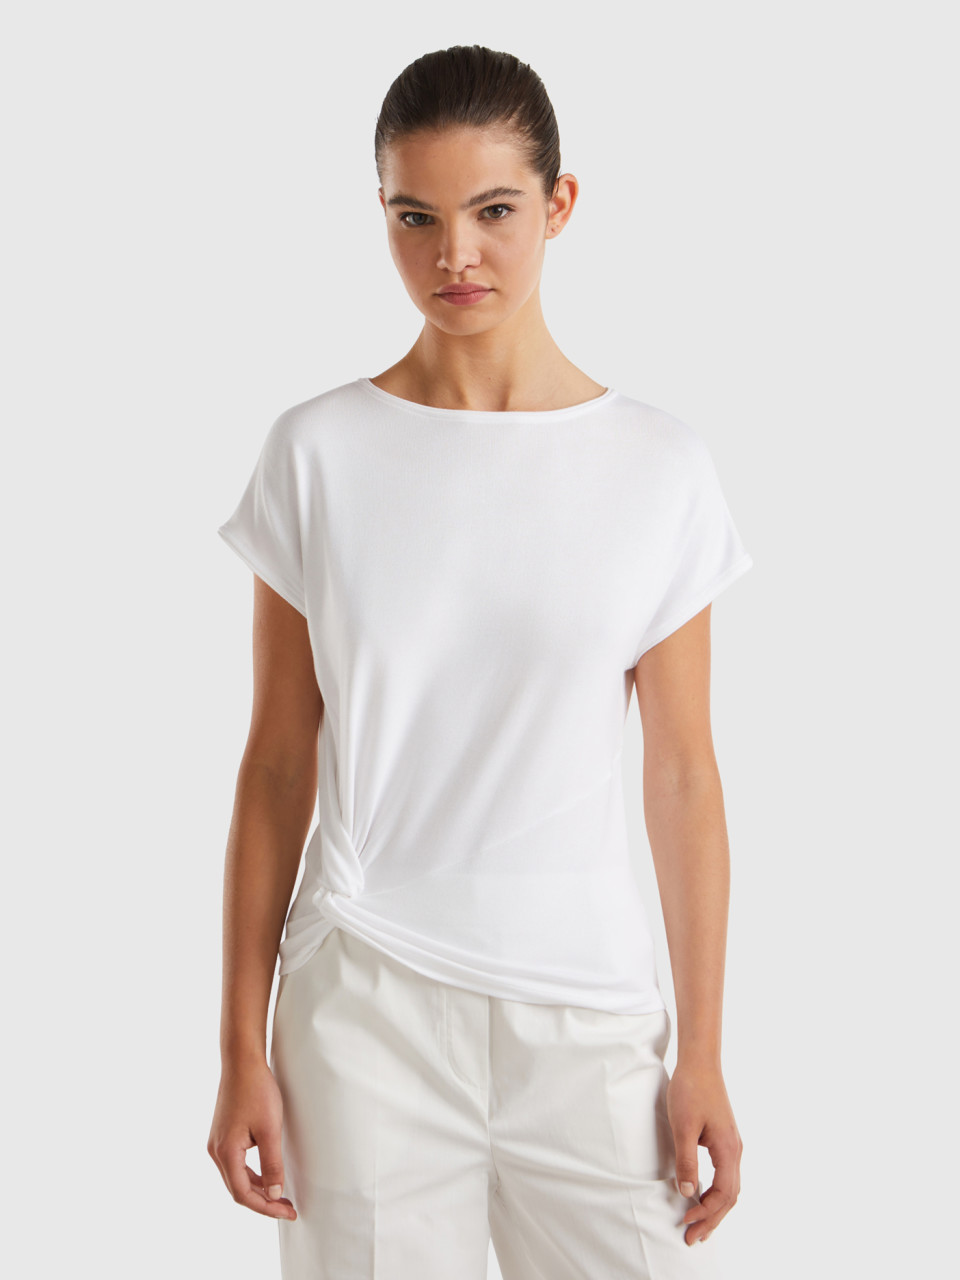 Benetton, Flowy T-shirt With Knot, White, Women